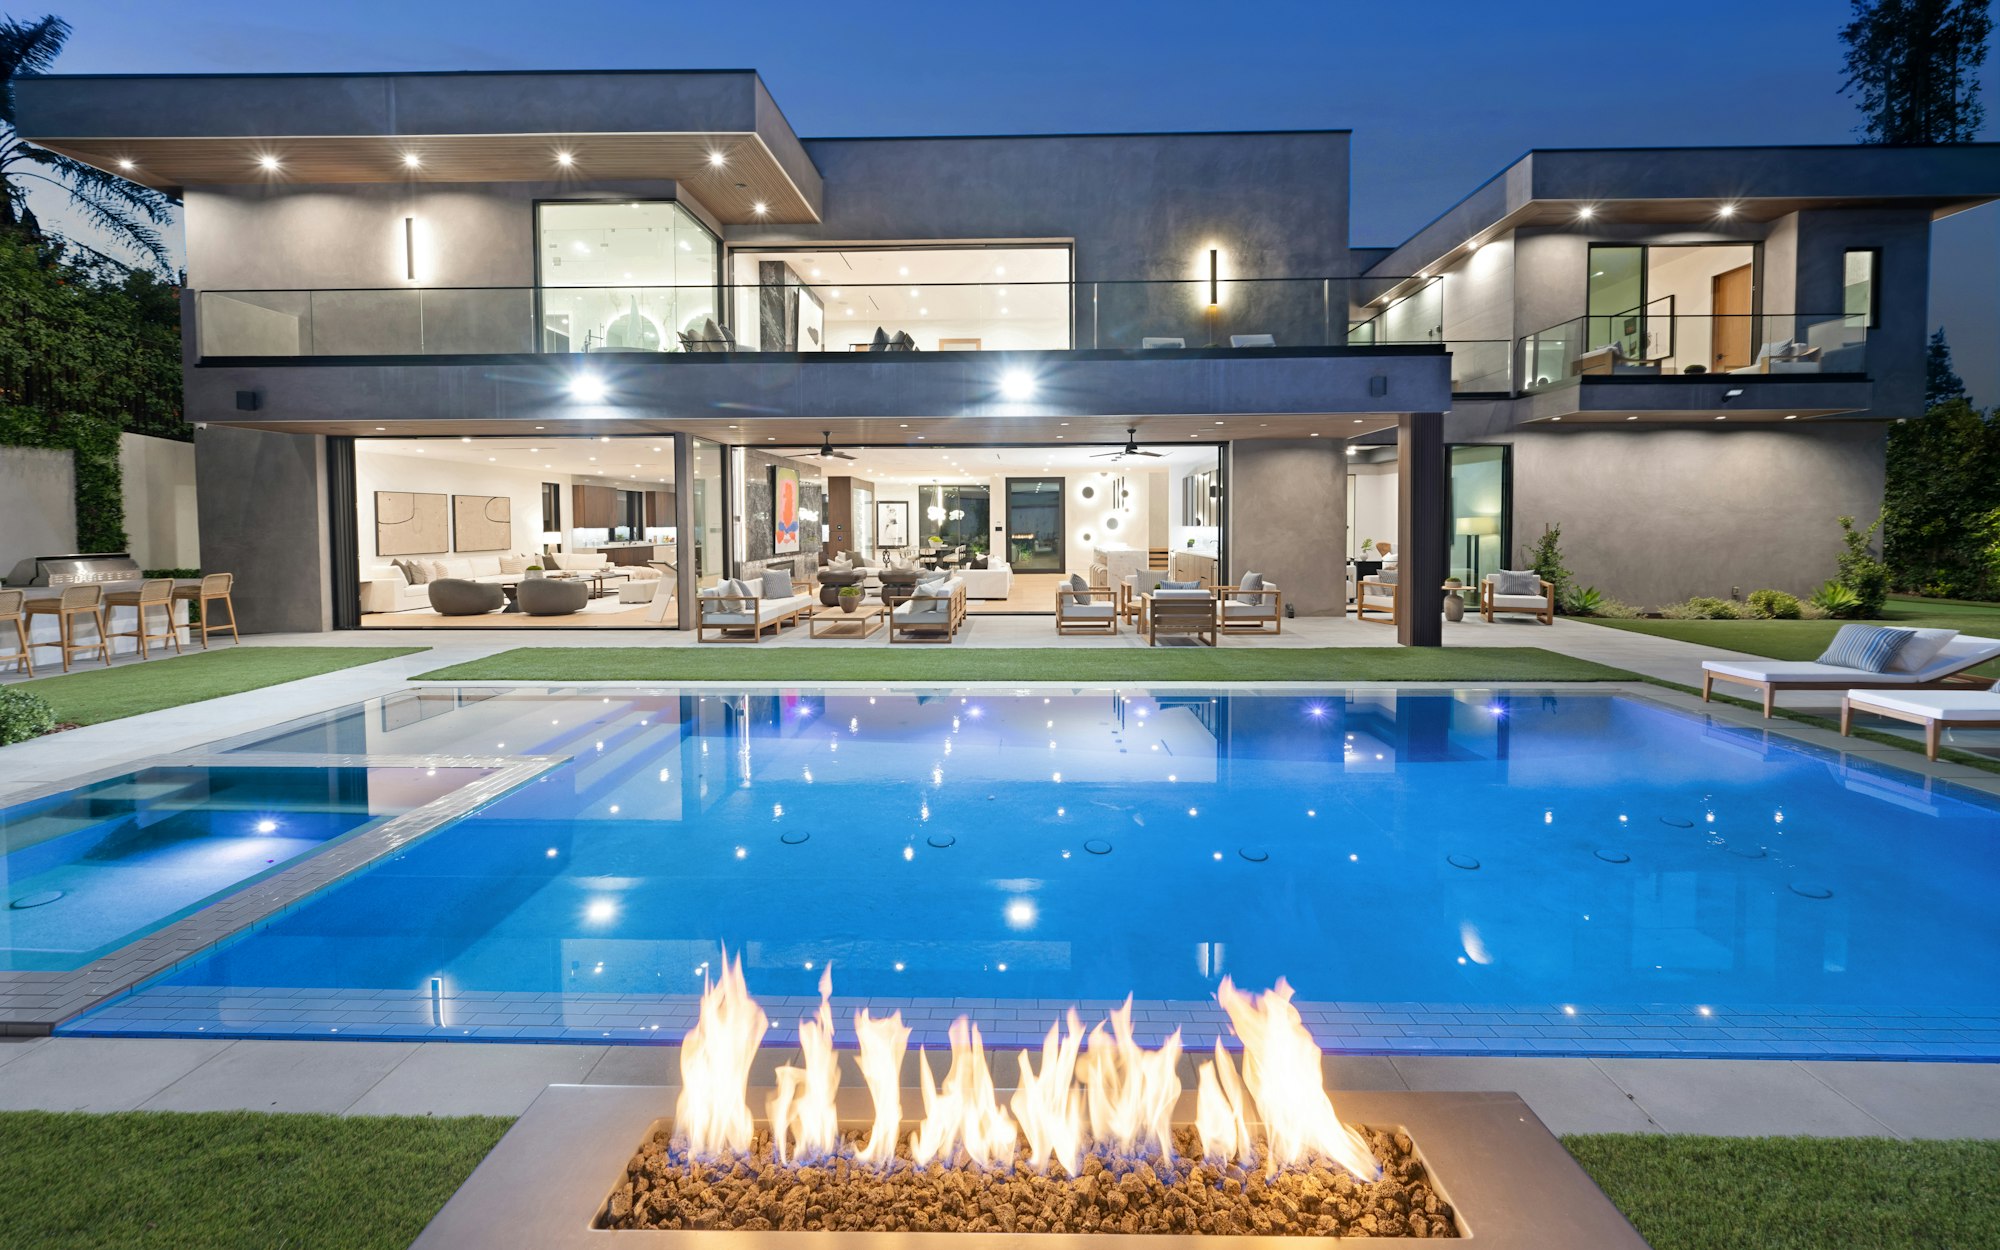 Fire pit near a pool on the ground, New Construction Home in Tarzana, California